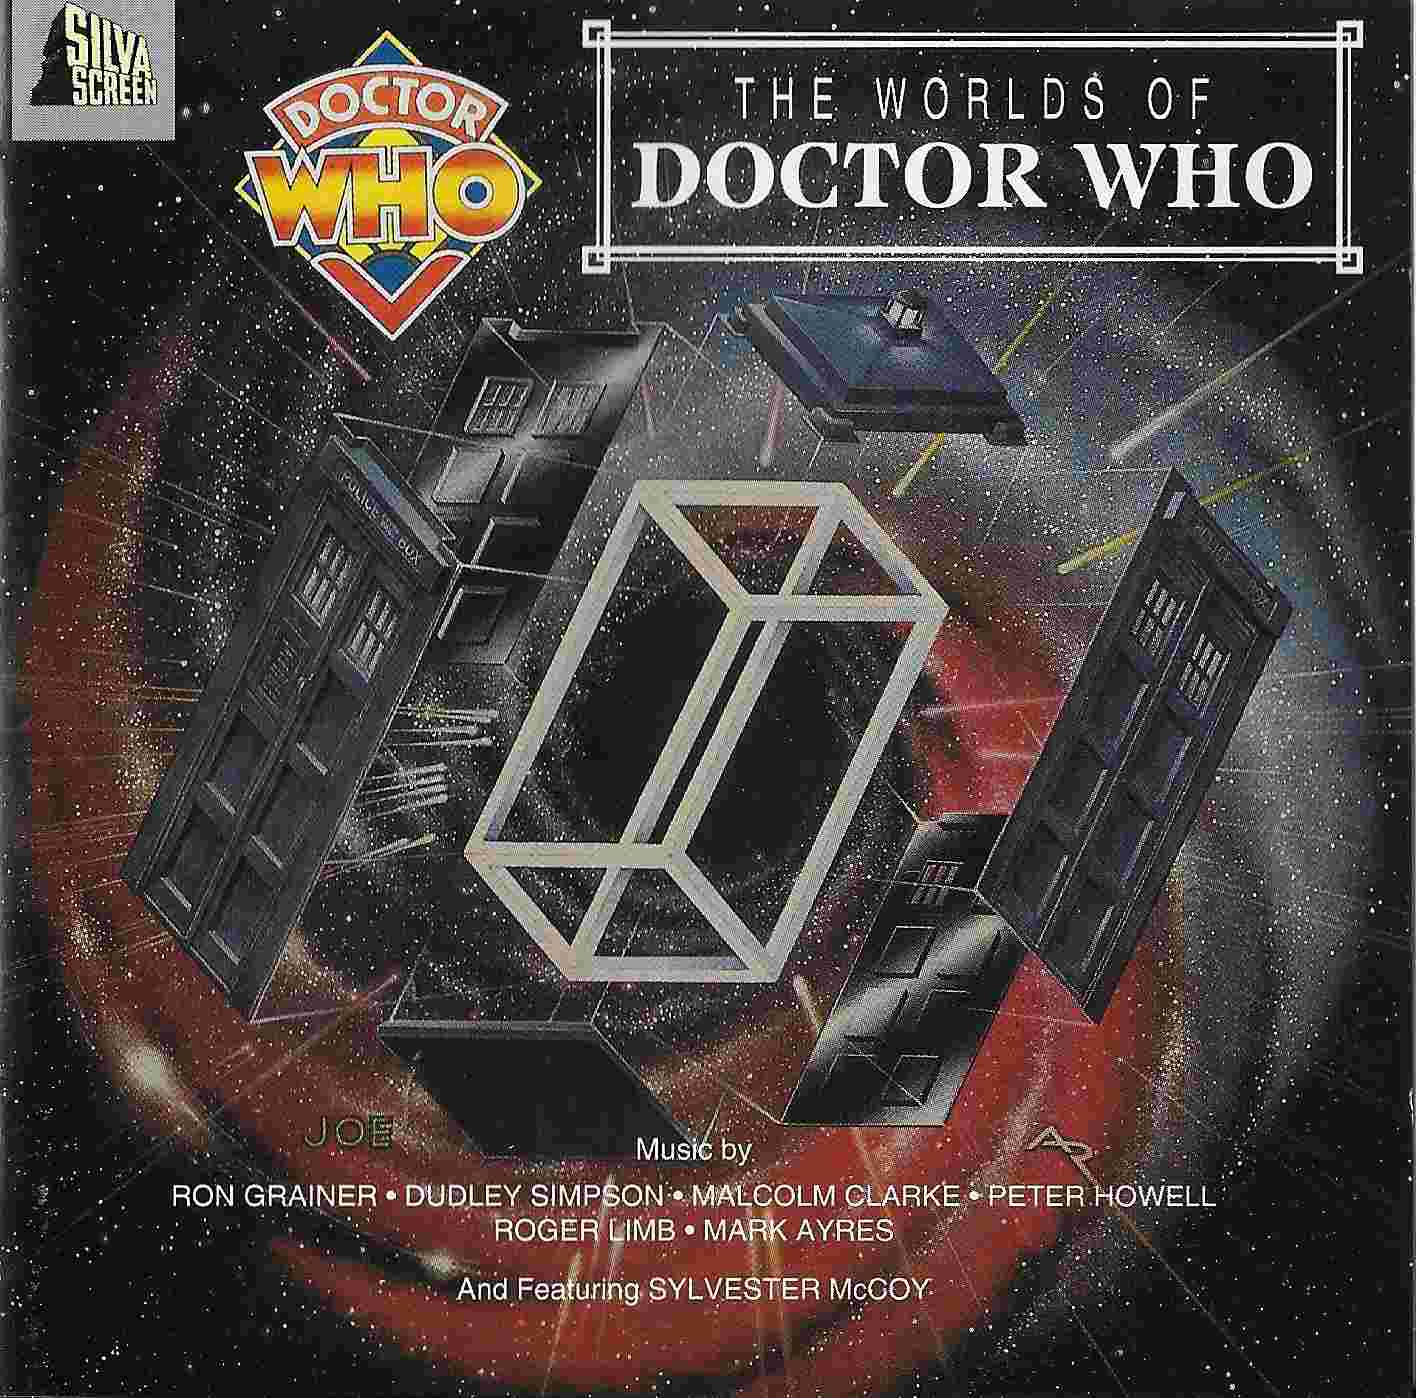 Picture of FILMCD 715 The Worlds of doctor who by artist Various from the BBC cds - Records and Tapes library